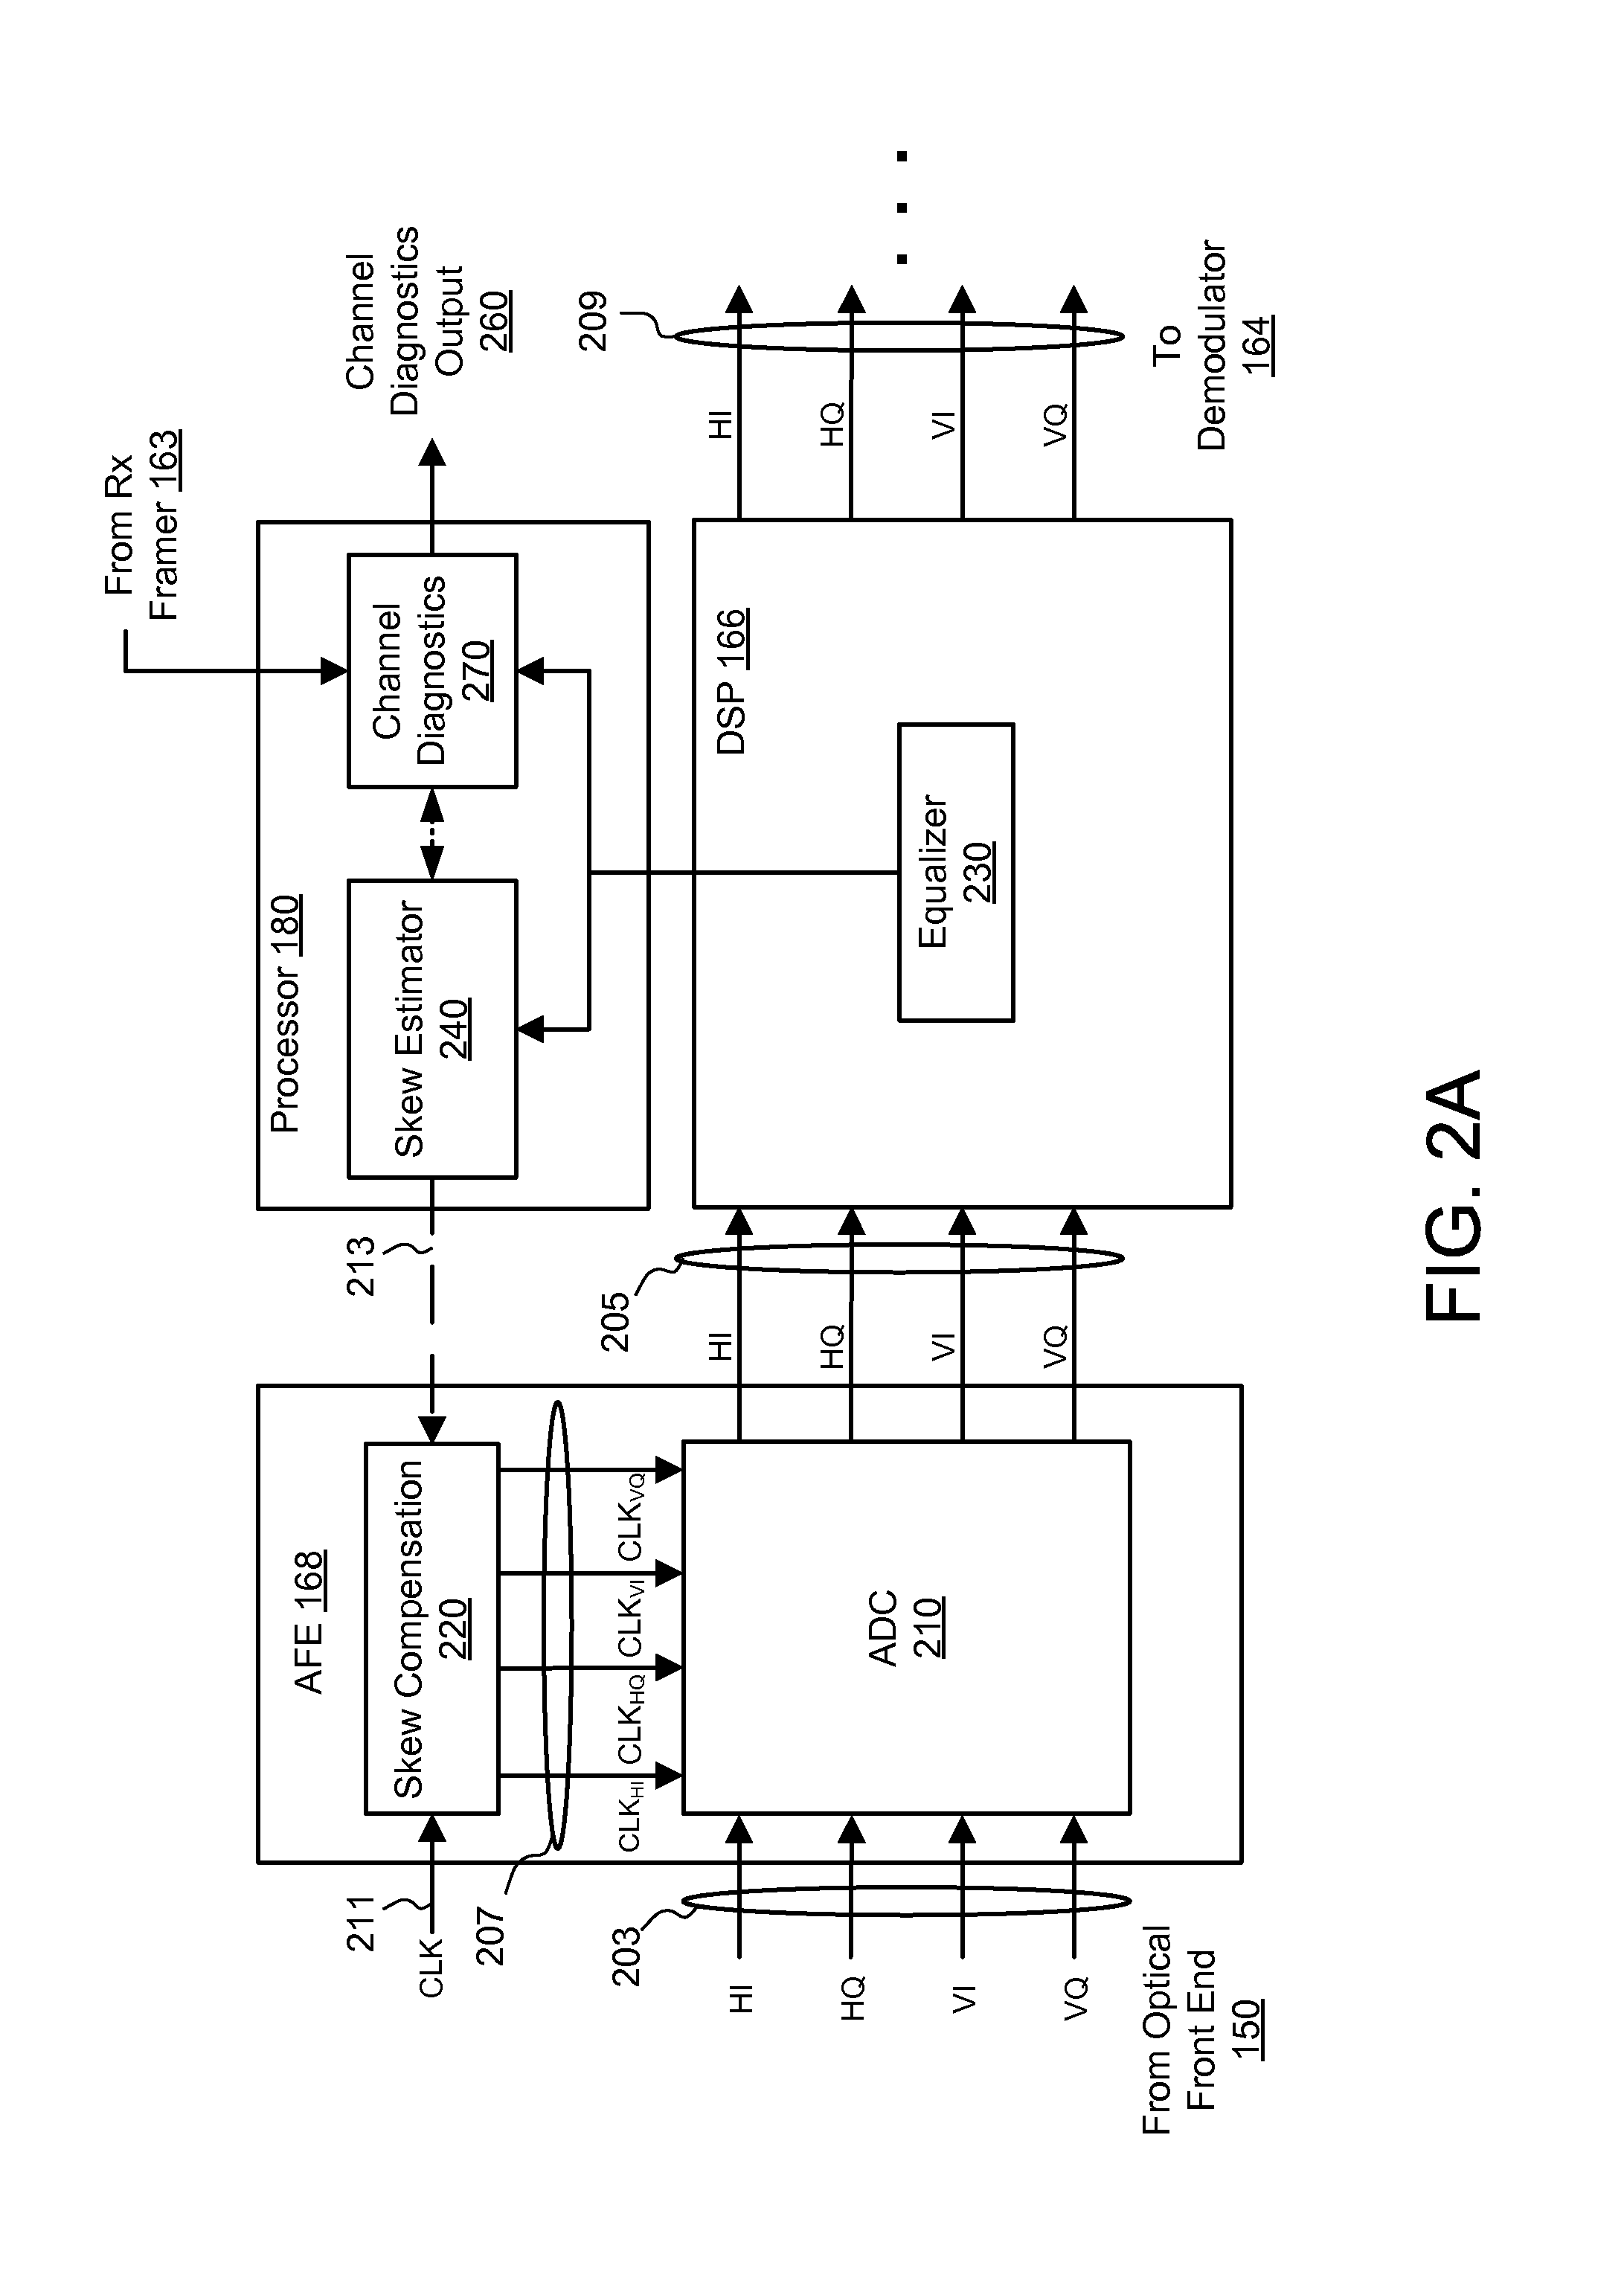 Reset in a receiver using center of gravity of equalizer coefficients